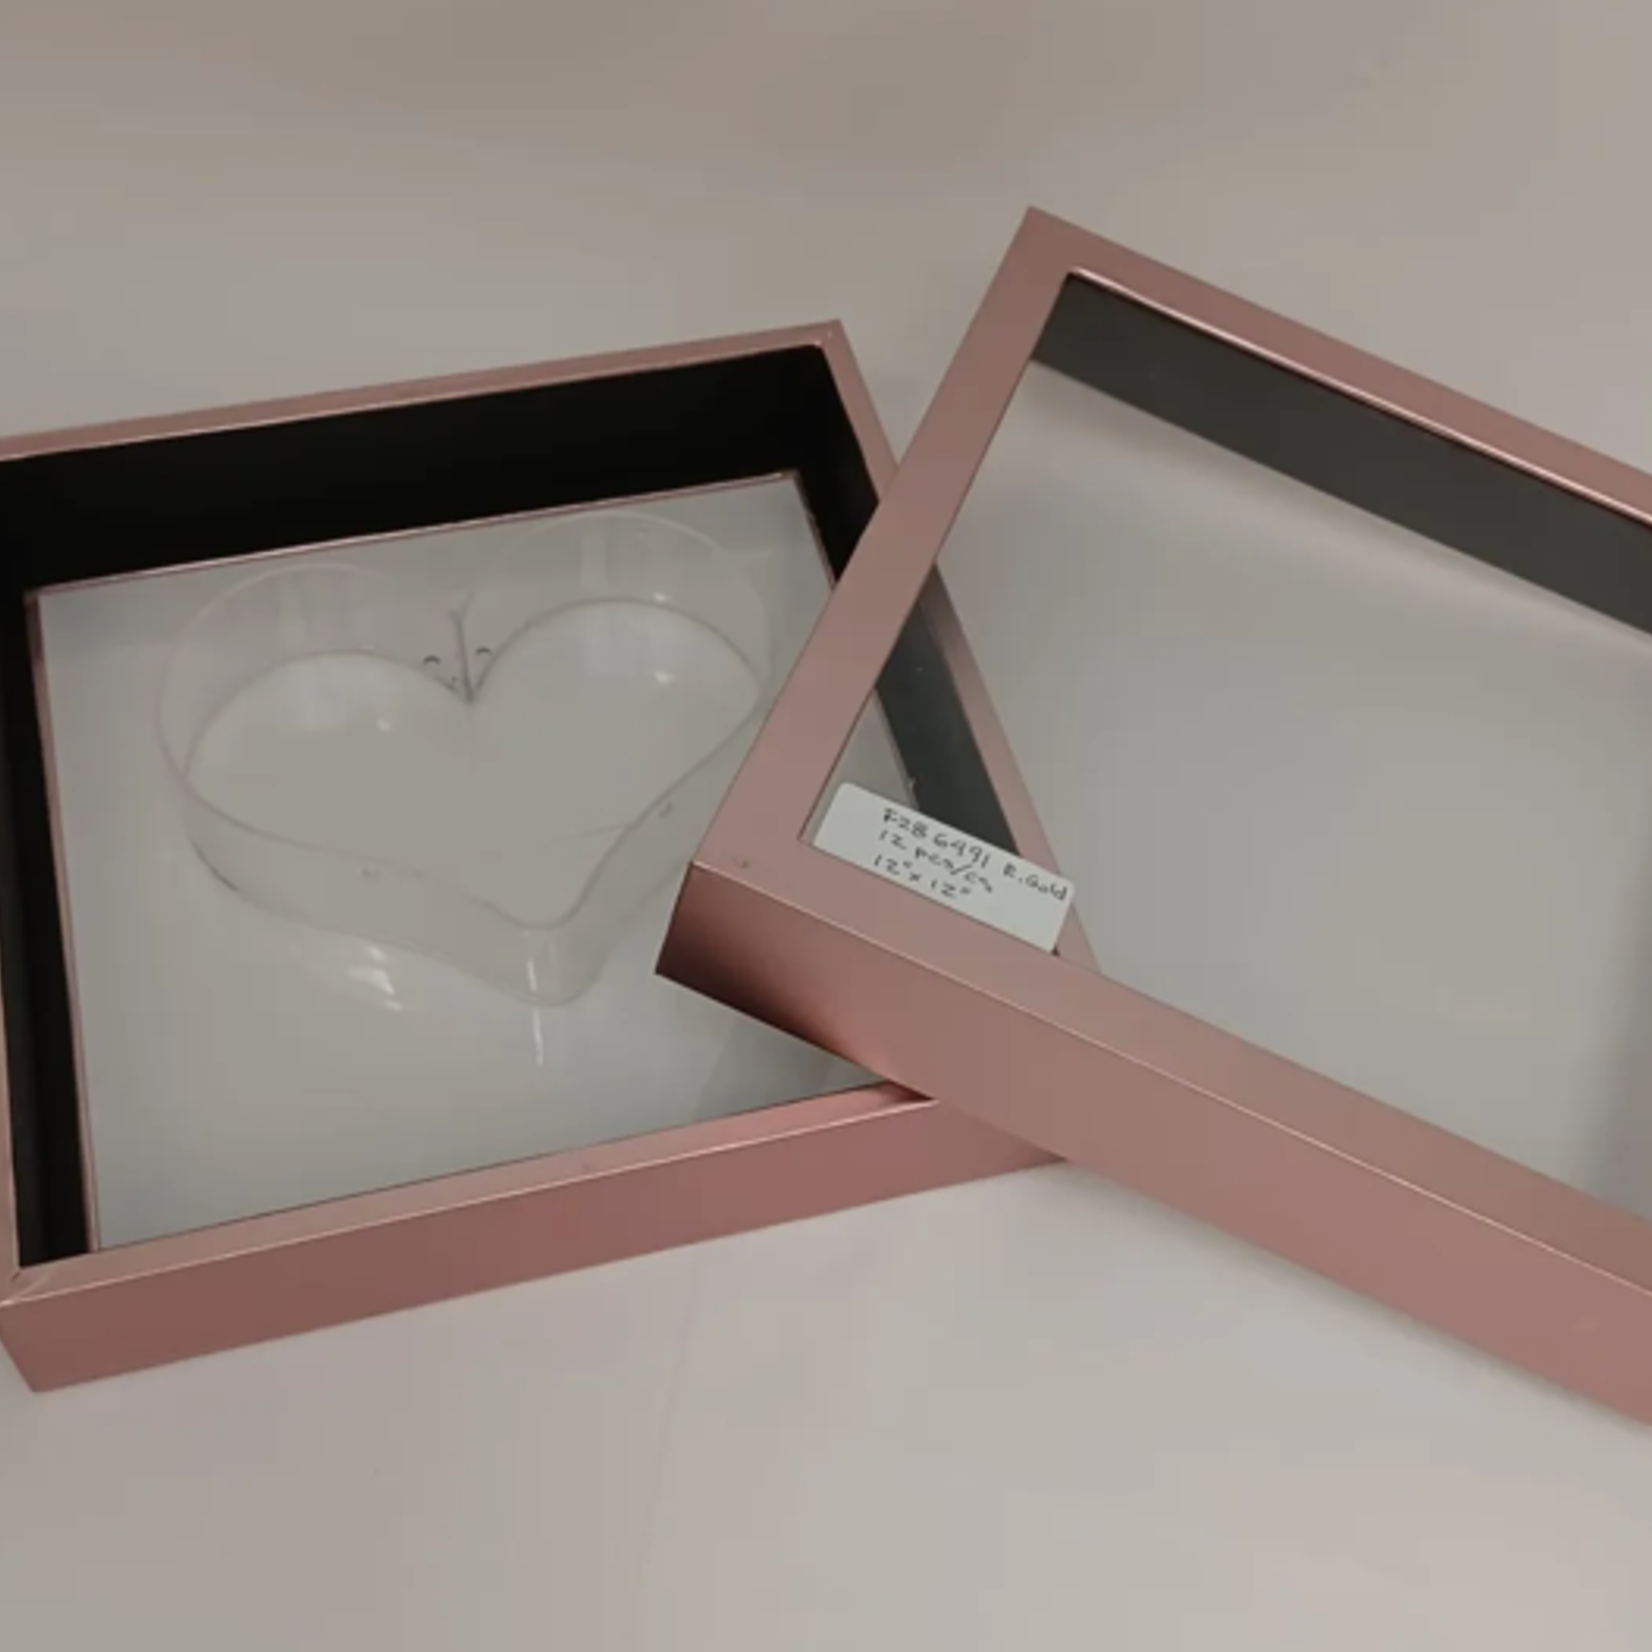 ROSE GOLD  ACRYLIC MAGNETIC SQUARE BOX, REG $39.99, 50% OFF